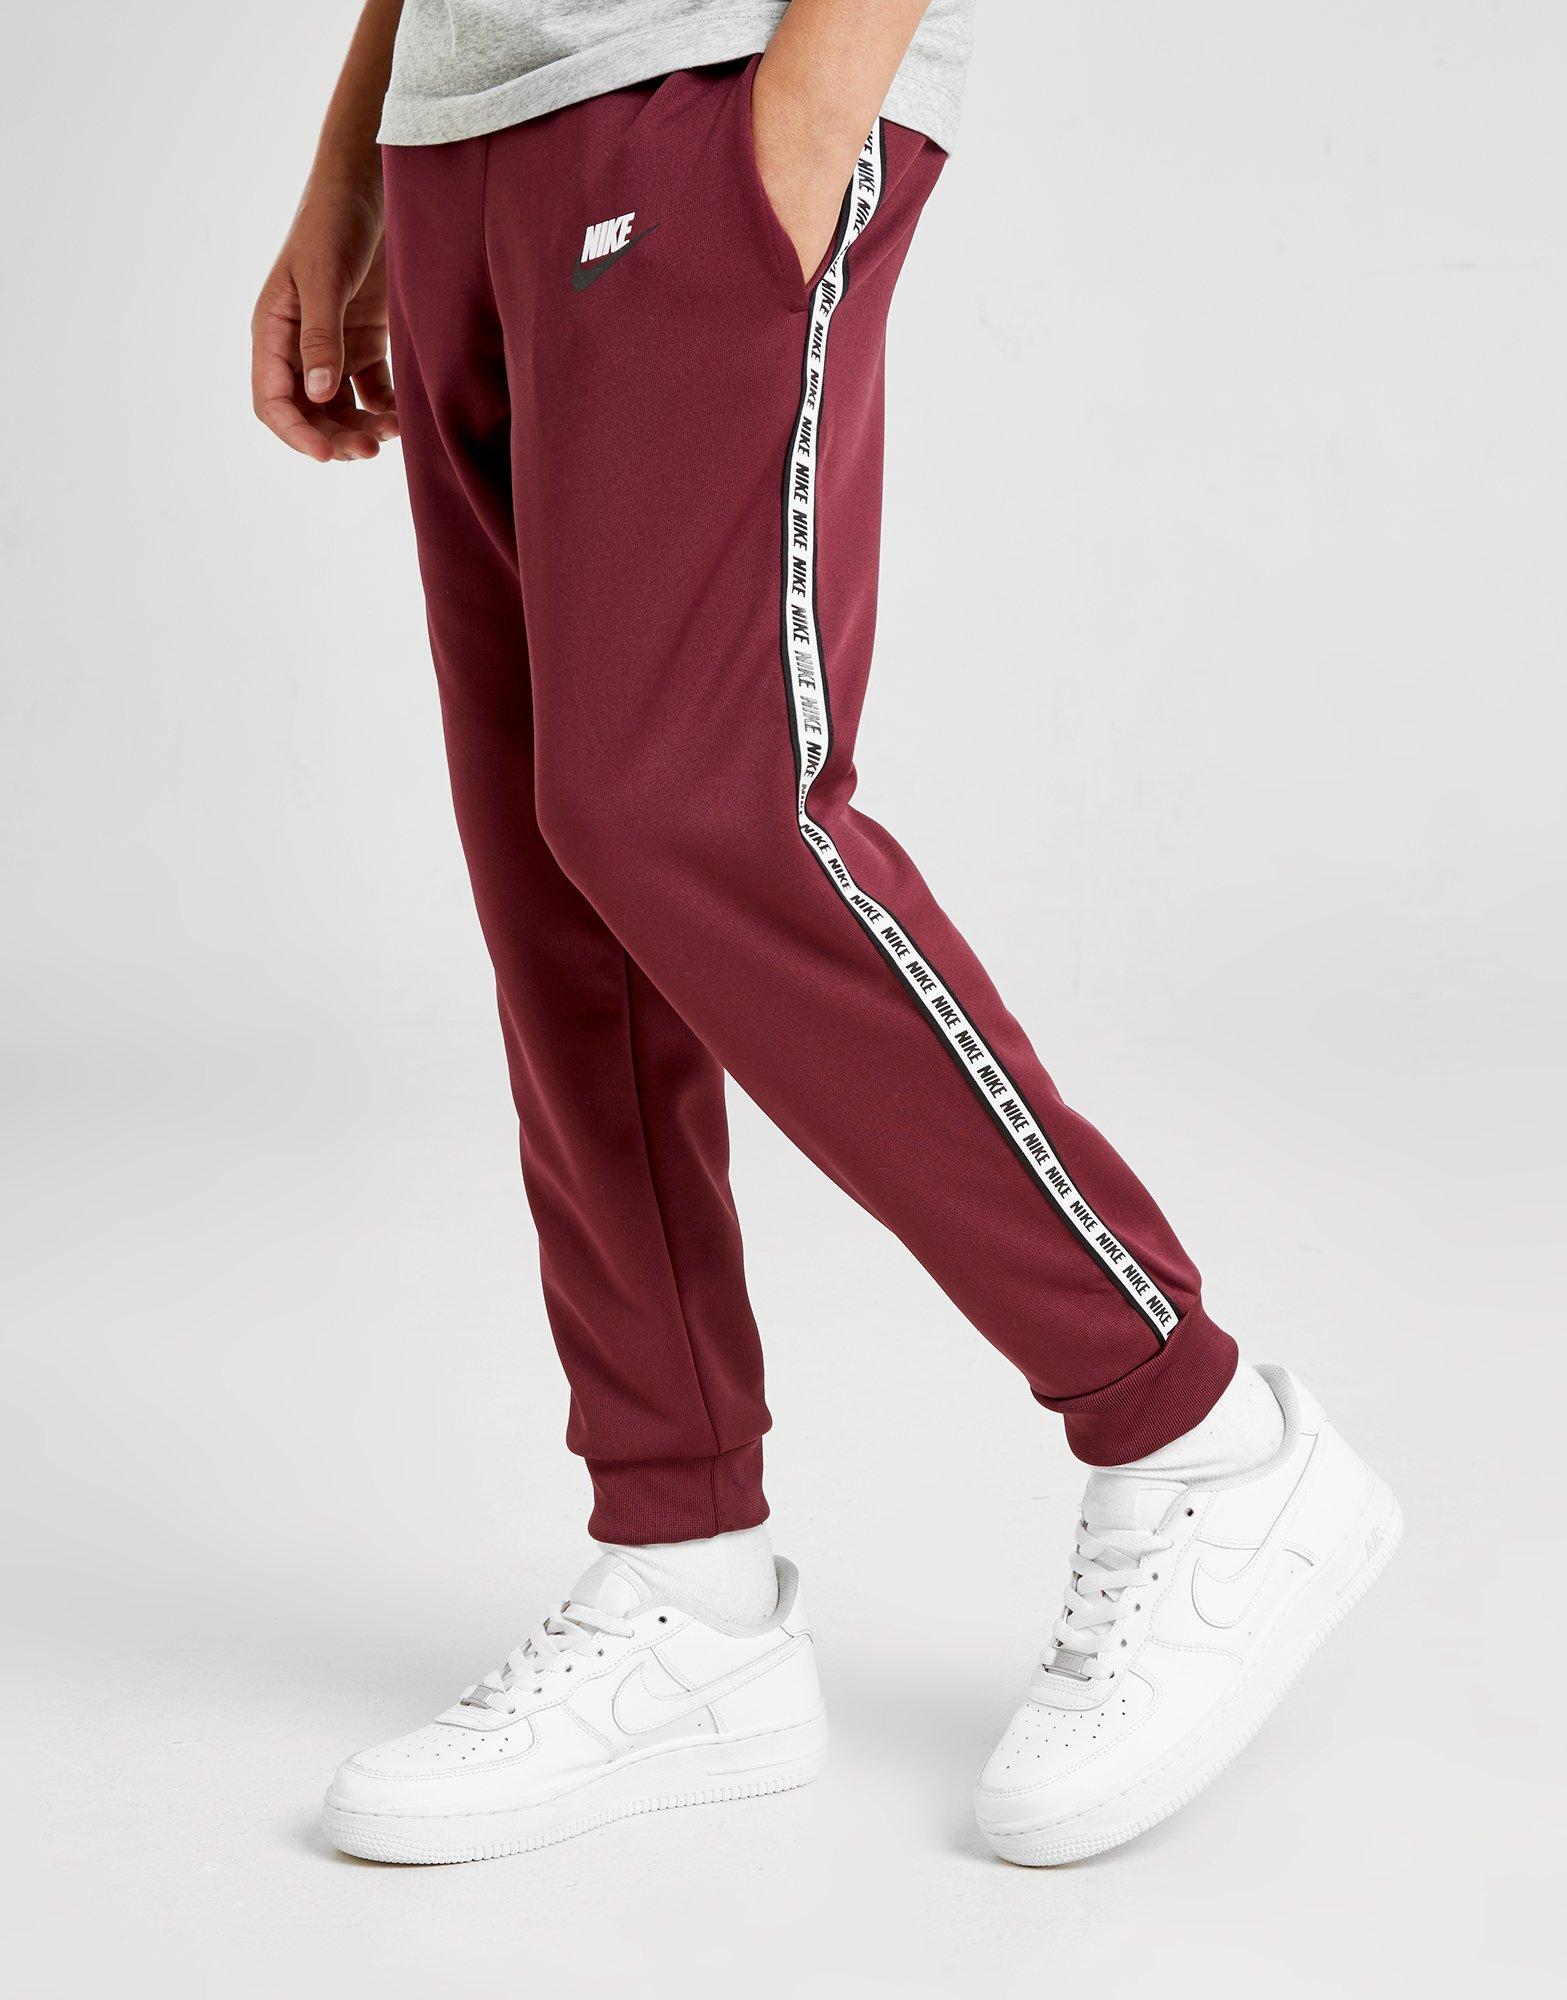 nike taped poly pant red